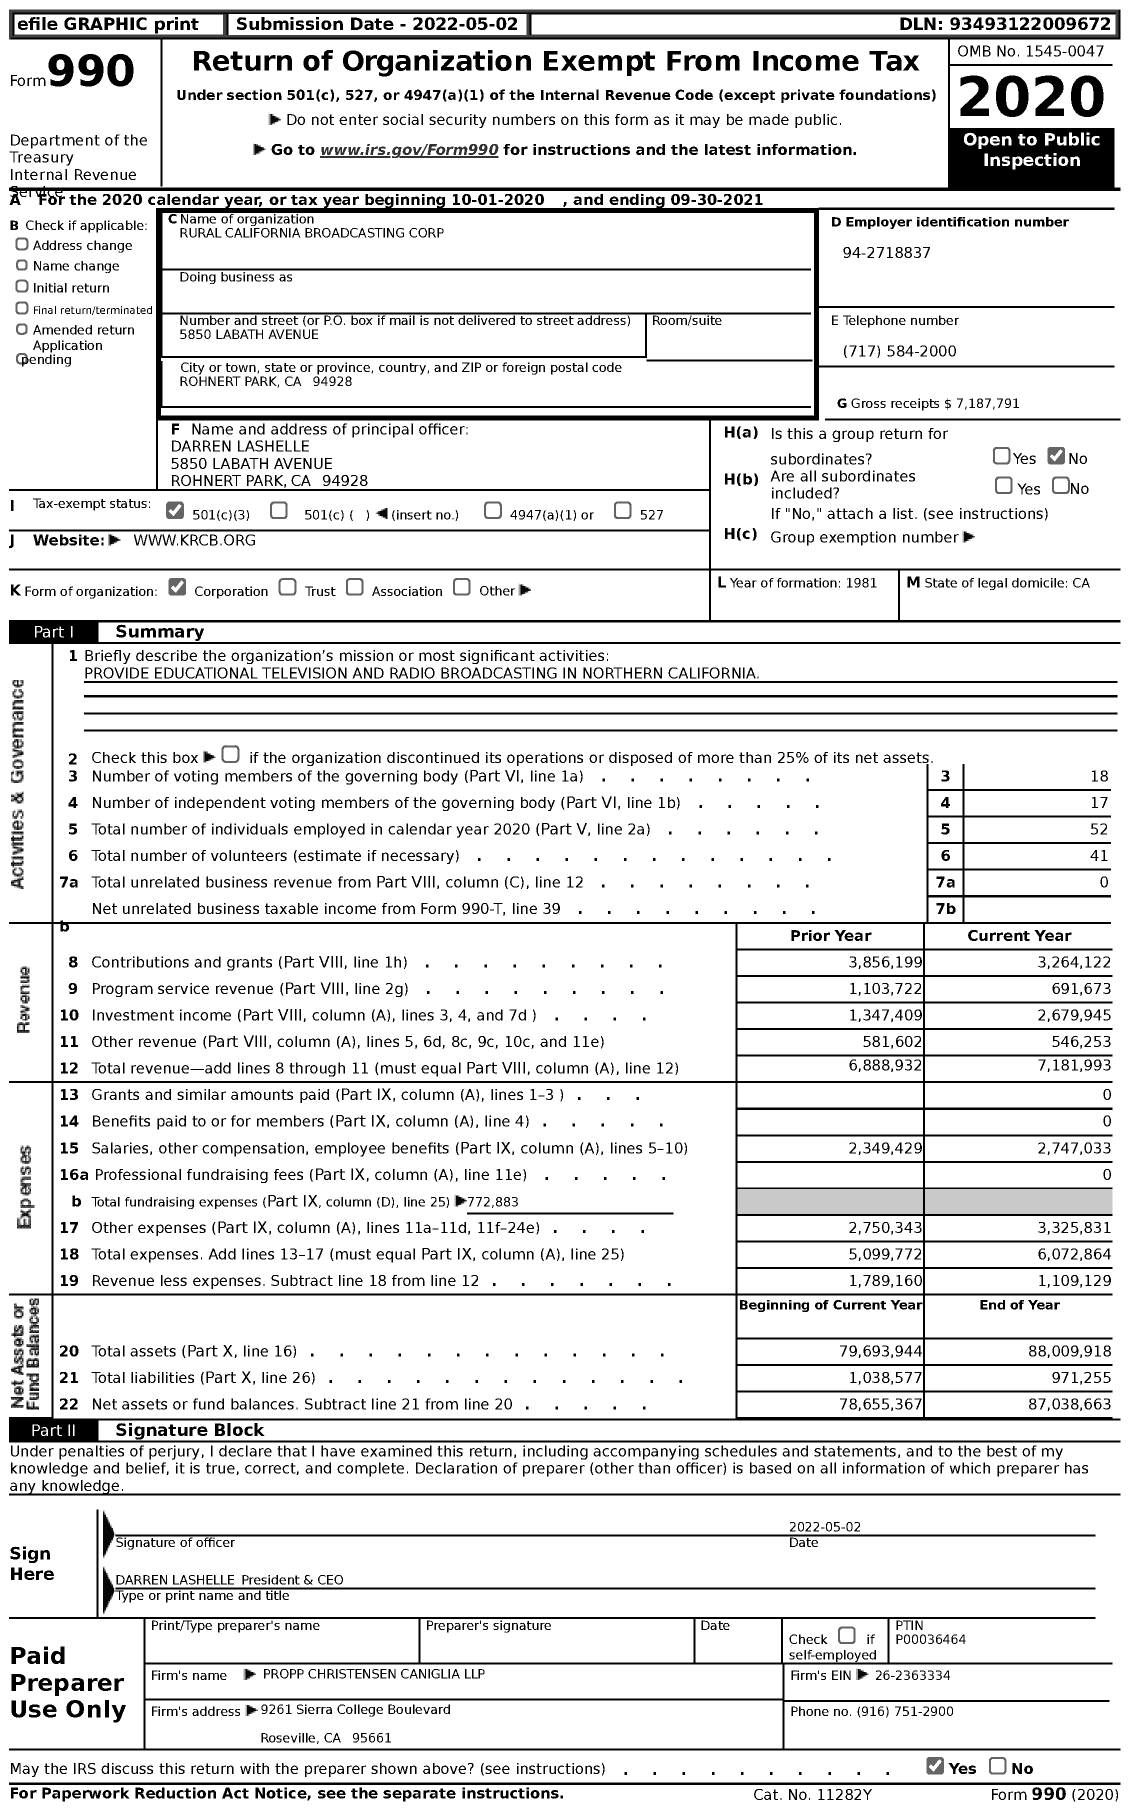 Image of first page of 2020 Form 990 for Rural California Broadcasting Corporation (KRCB)